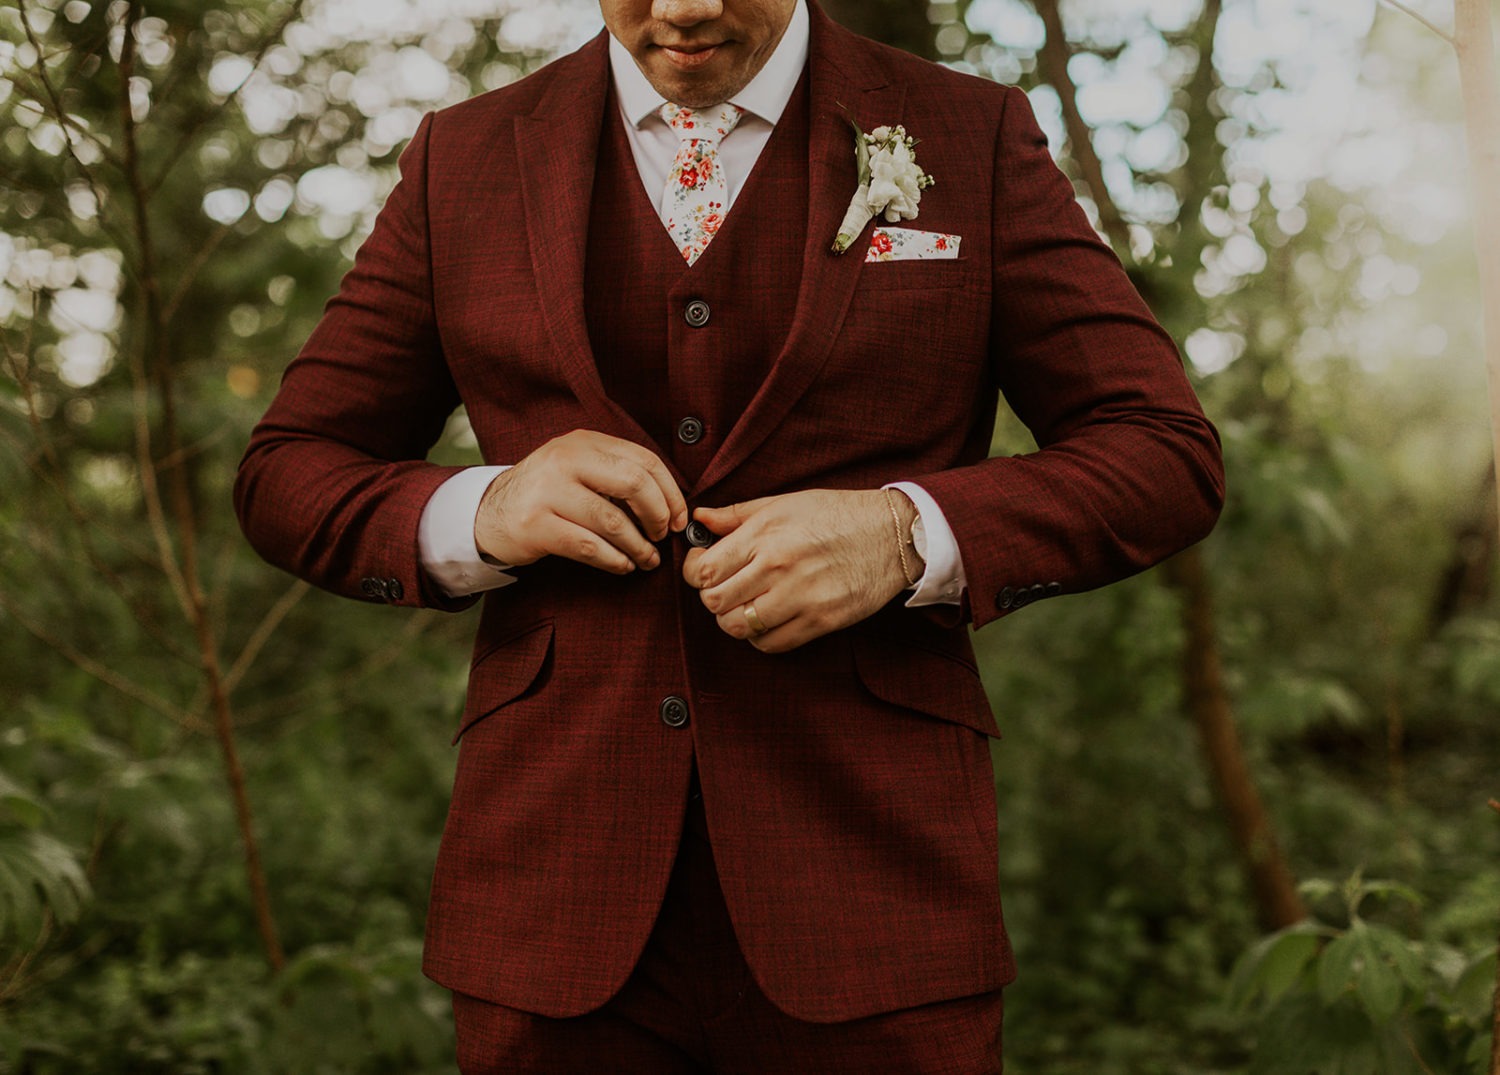 Groom buttons suit jacket at outdoor wedding